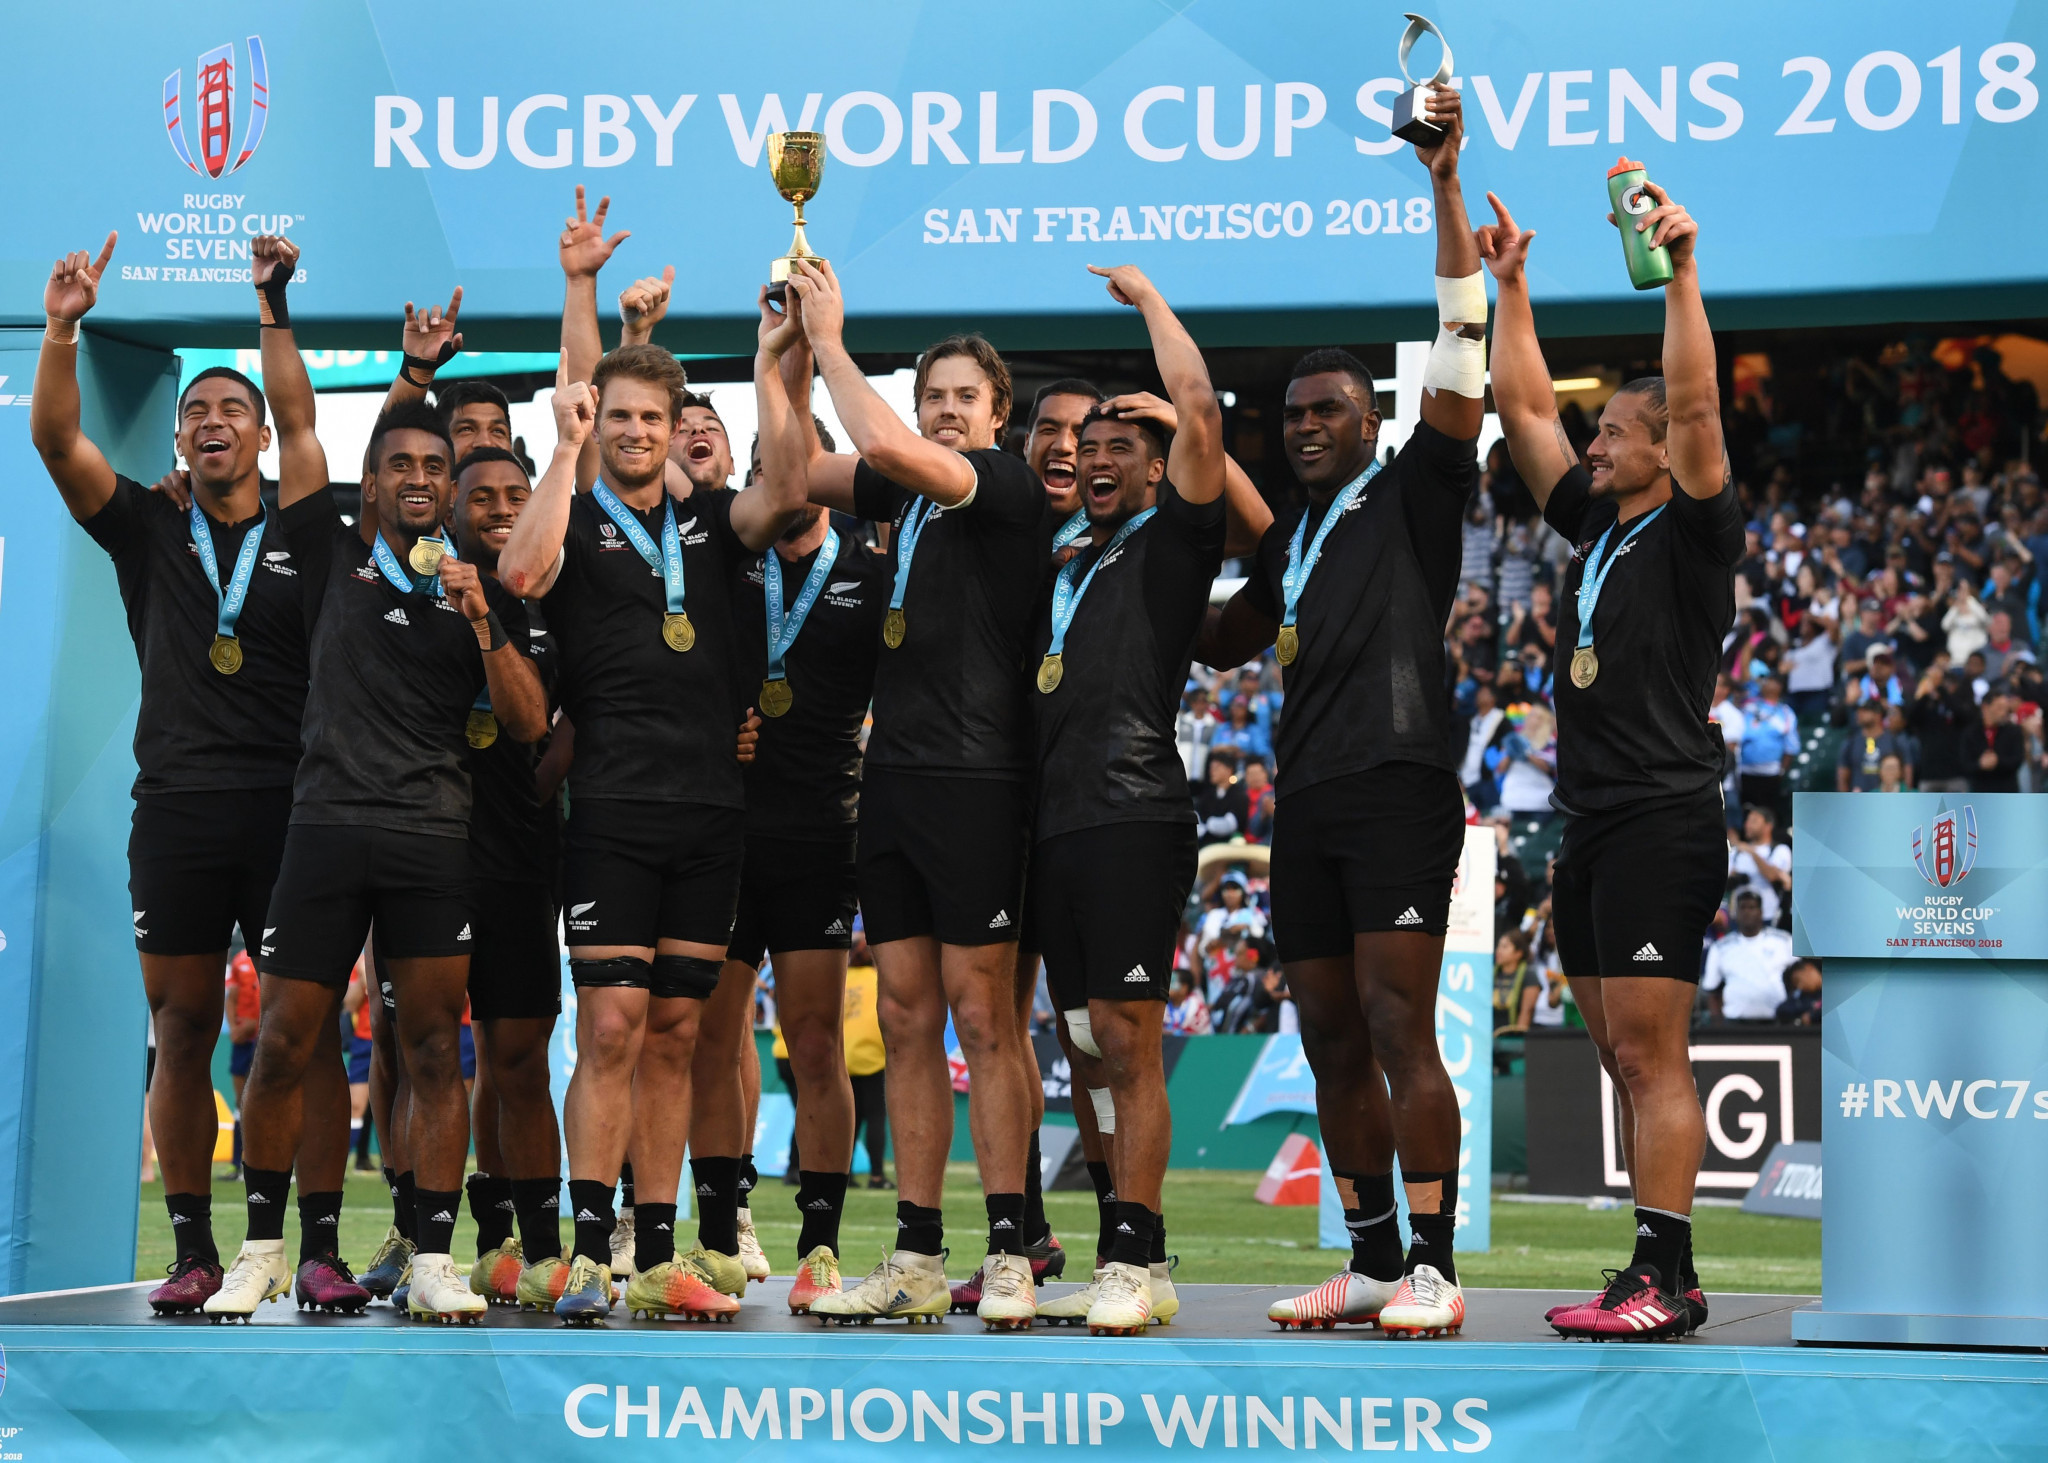 New Zealand beat England in the men's final at last year's Rugby World Cup Sevens in San Francisco ©Getty Images